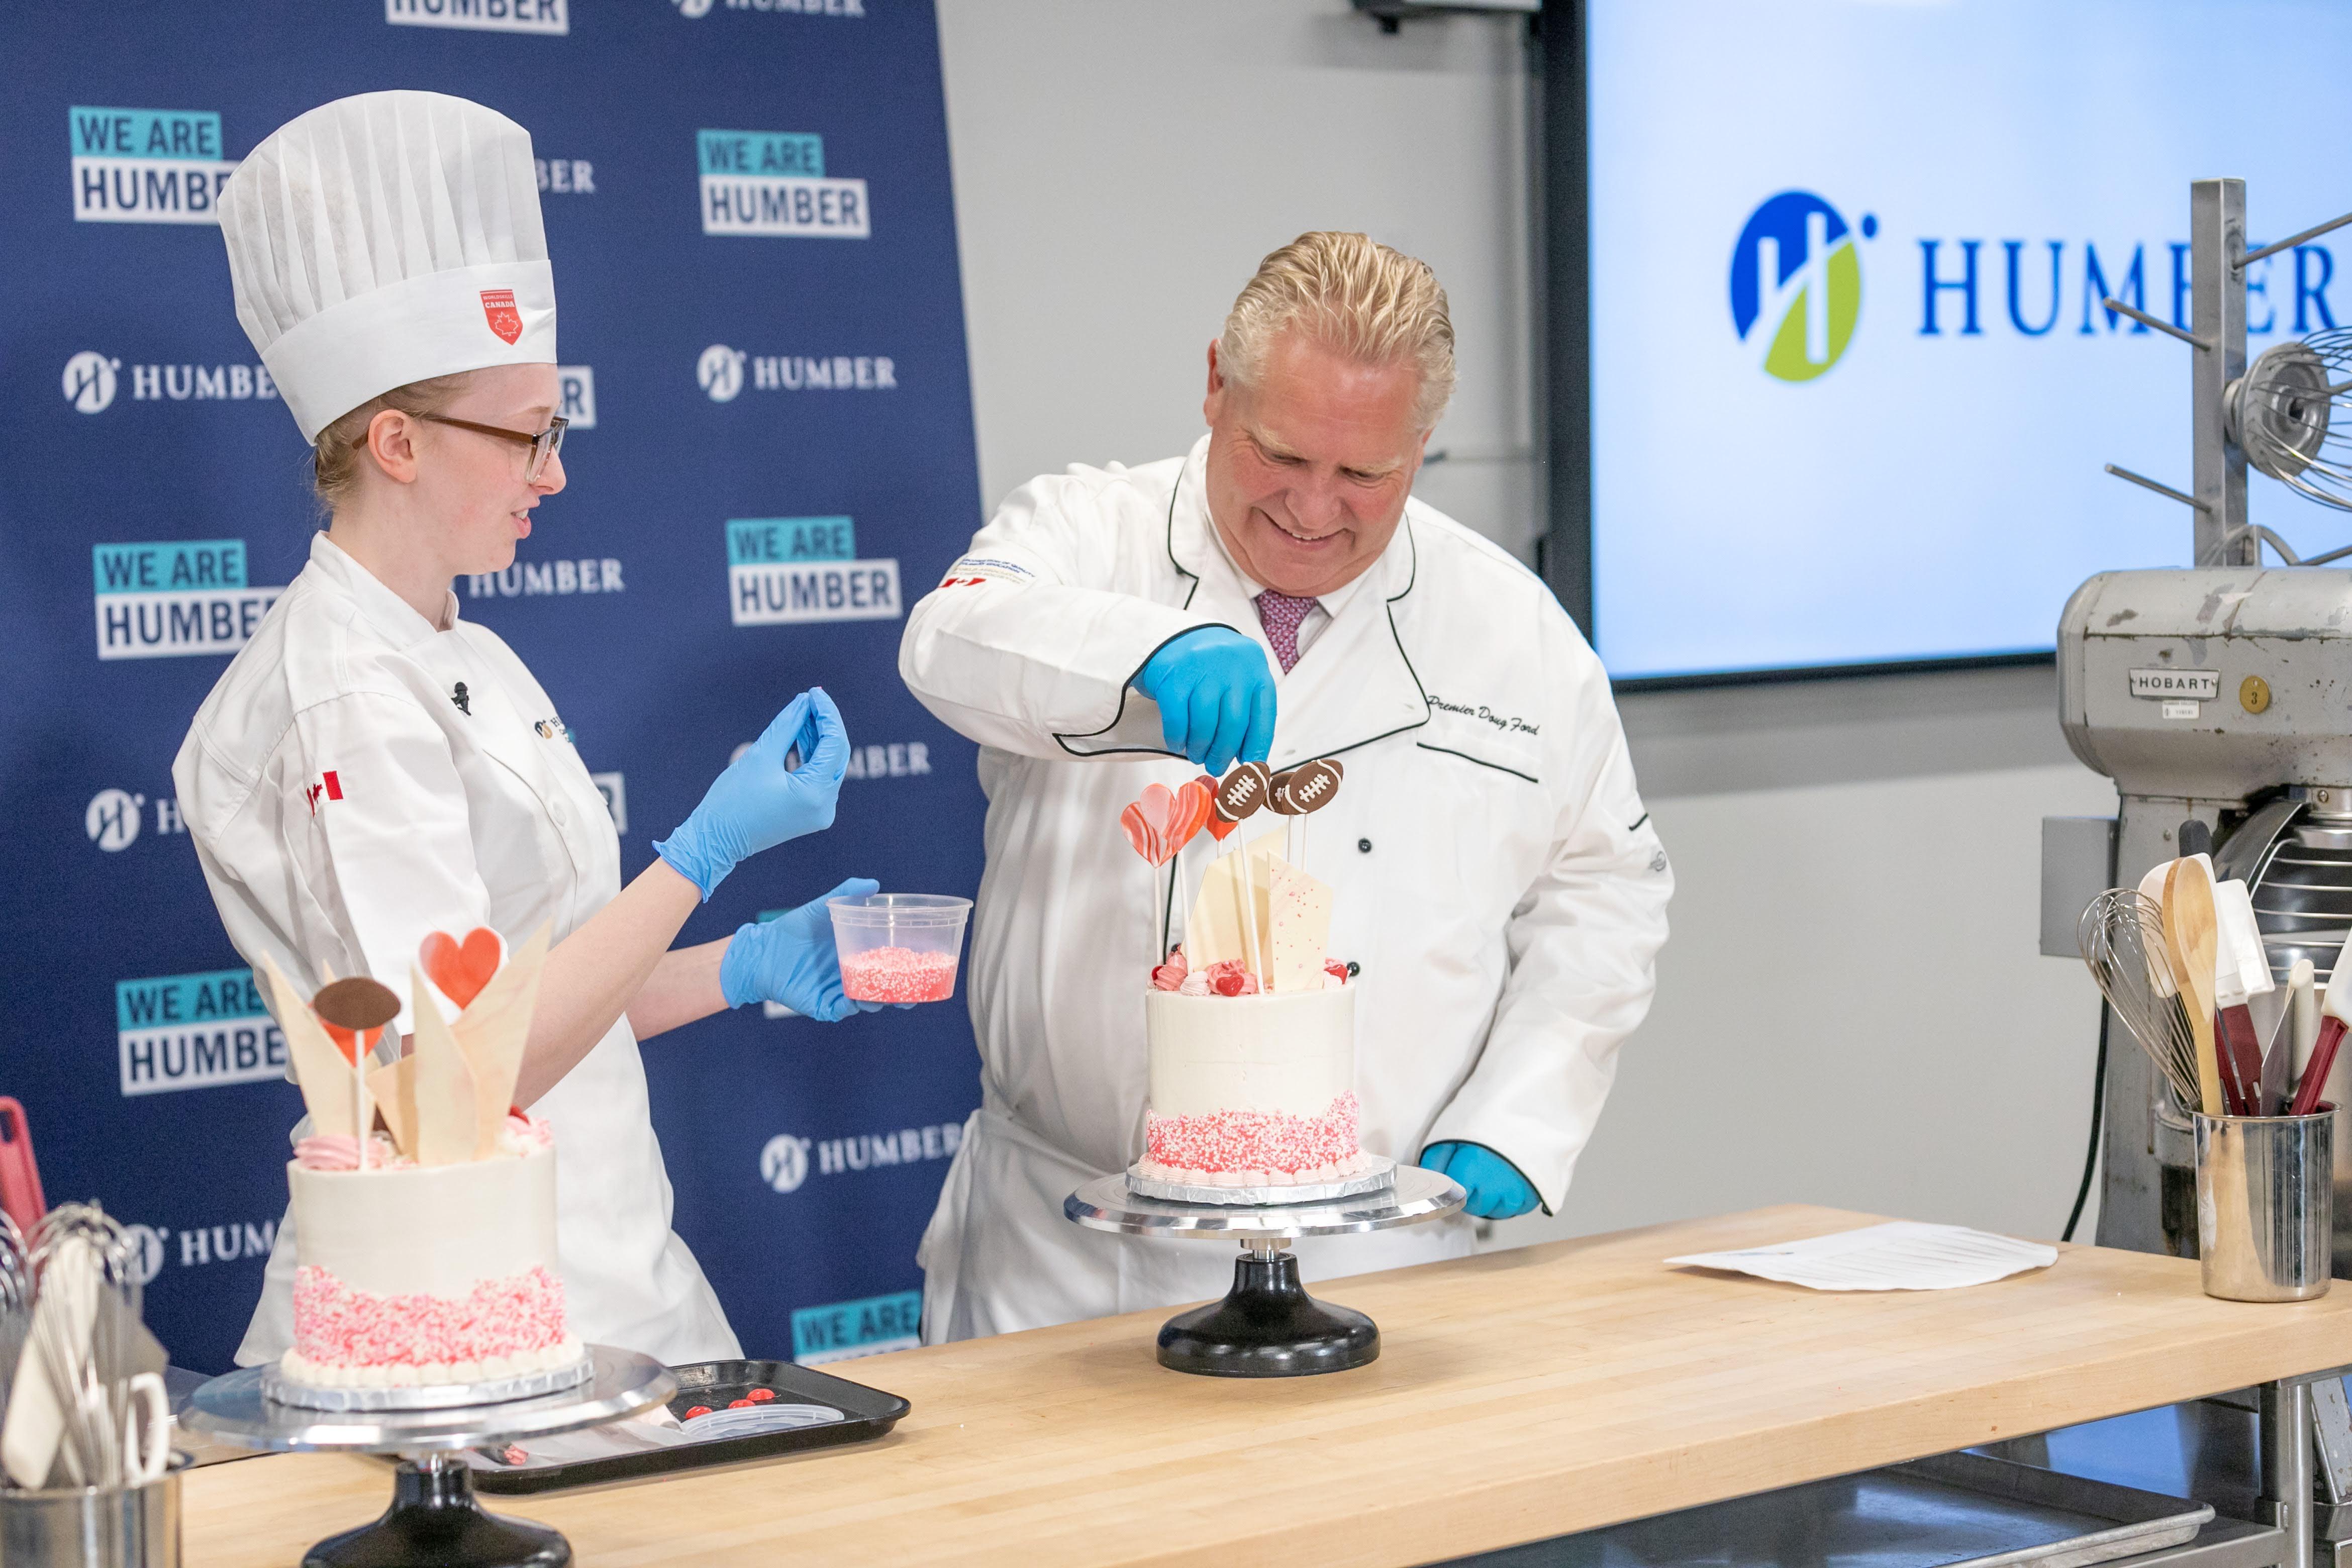  Premier Doug Ford wearing a chef’s outfit decorates a cake with the help of Humber graduate Emma Kilgannon.